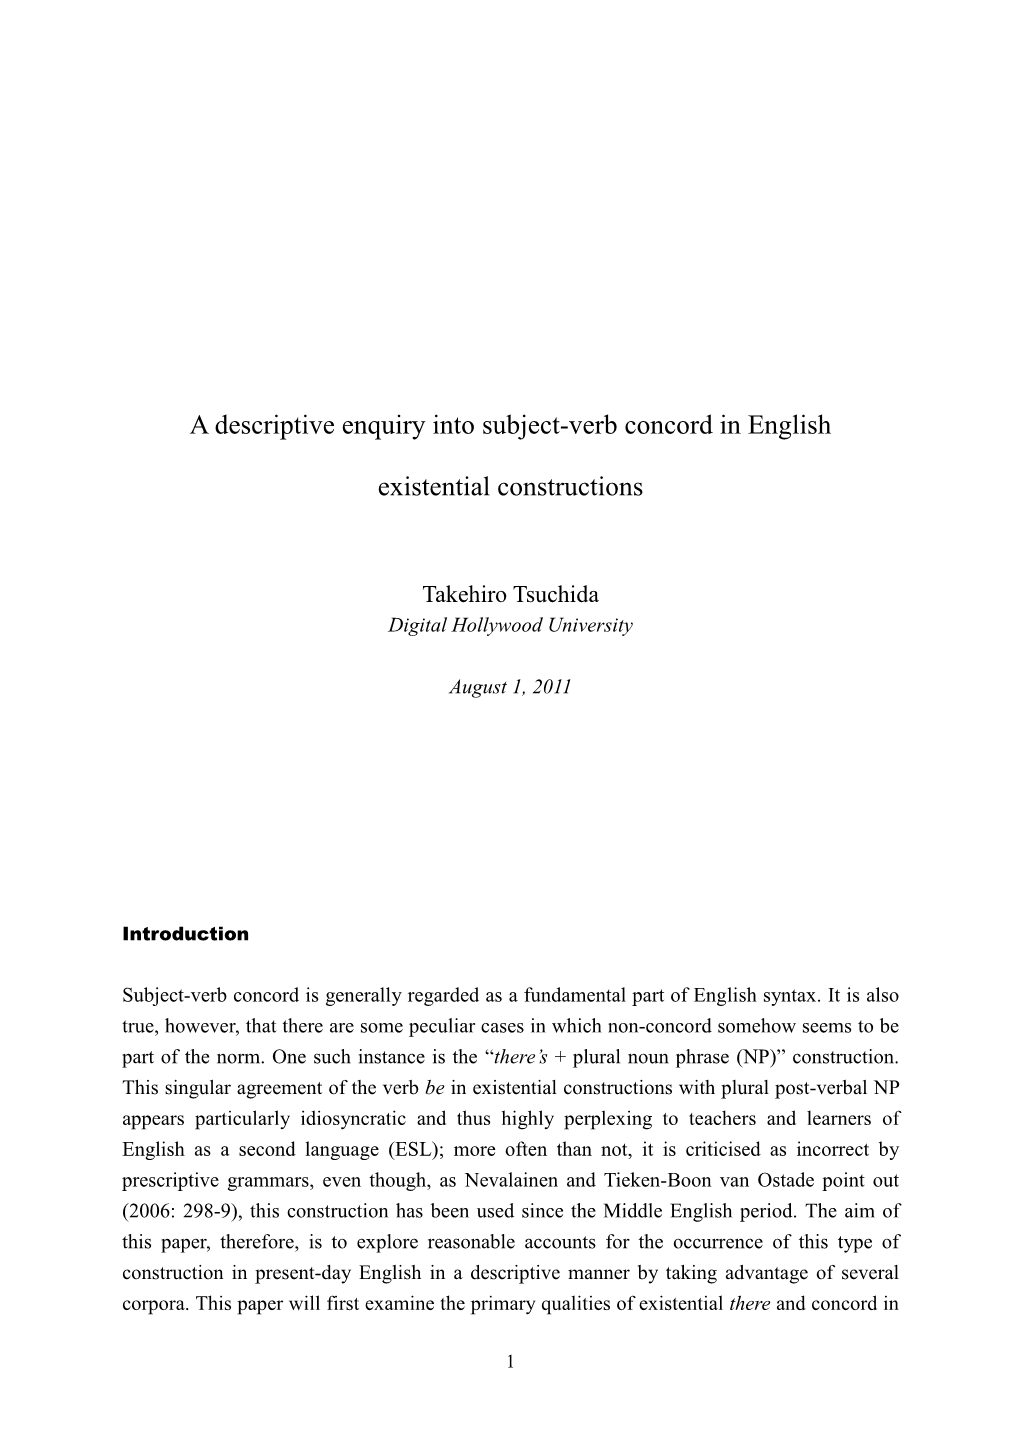 A Descriptive Enquiry Into Subject-Verb Concord in English Existential Constructions